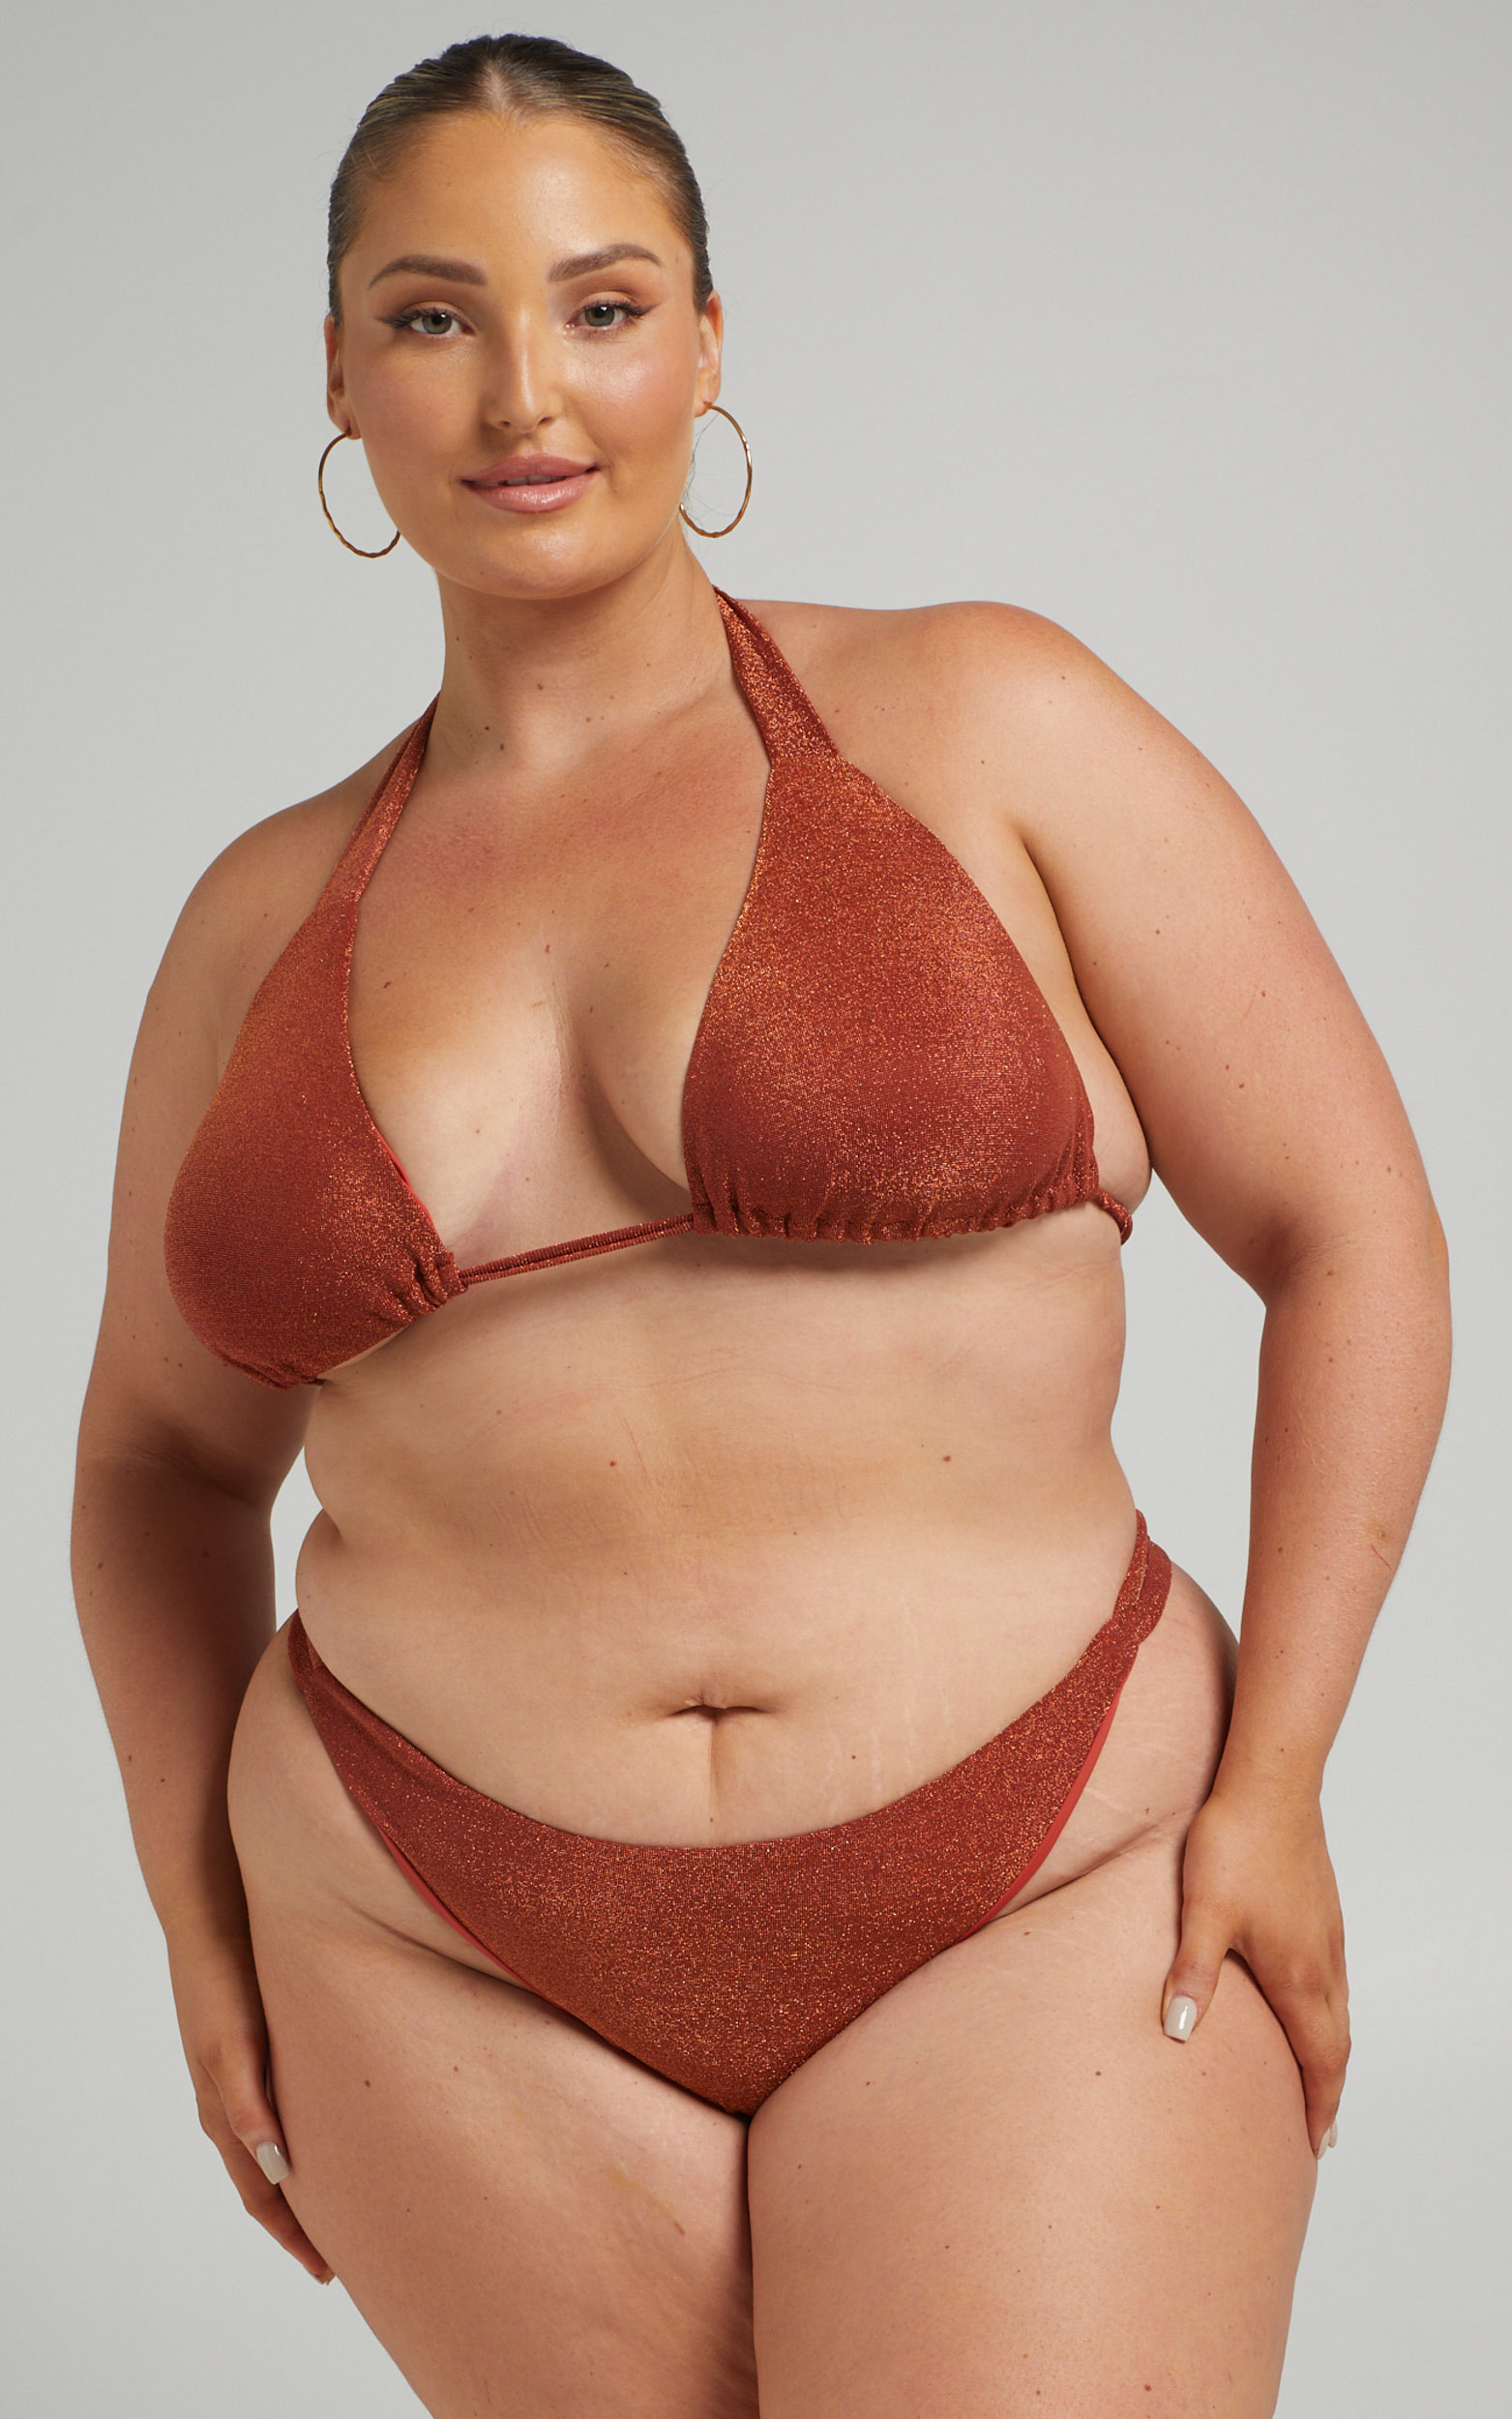 Cove Thick Strap Bikini Top in Rust Lurex - 04, BRN1, hi-res image number null